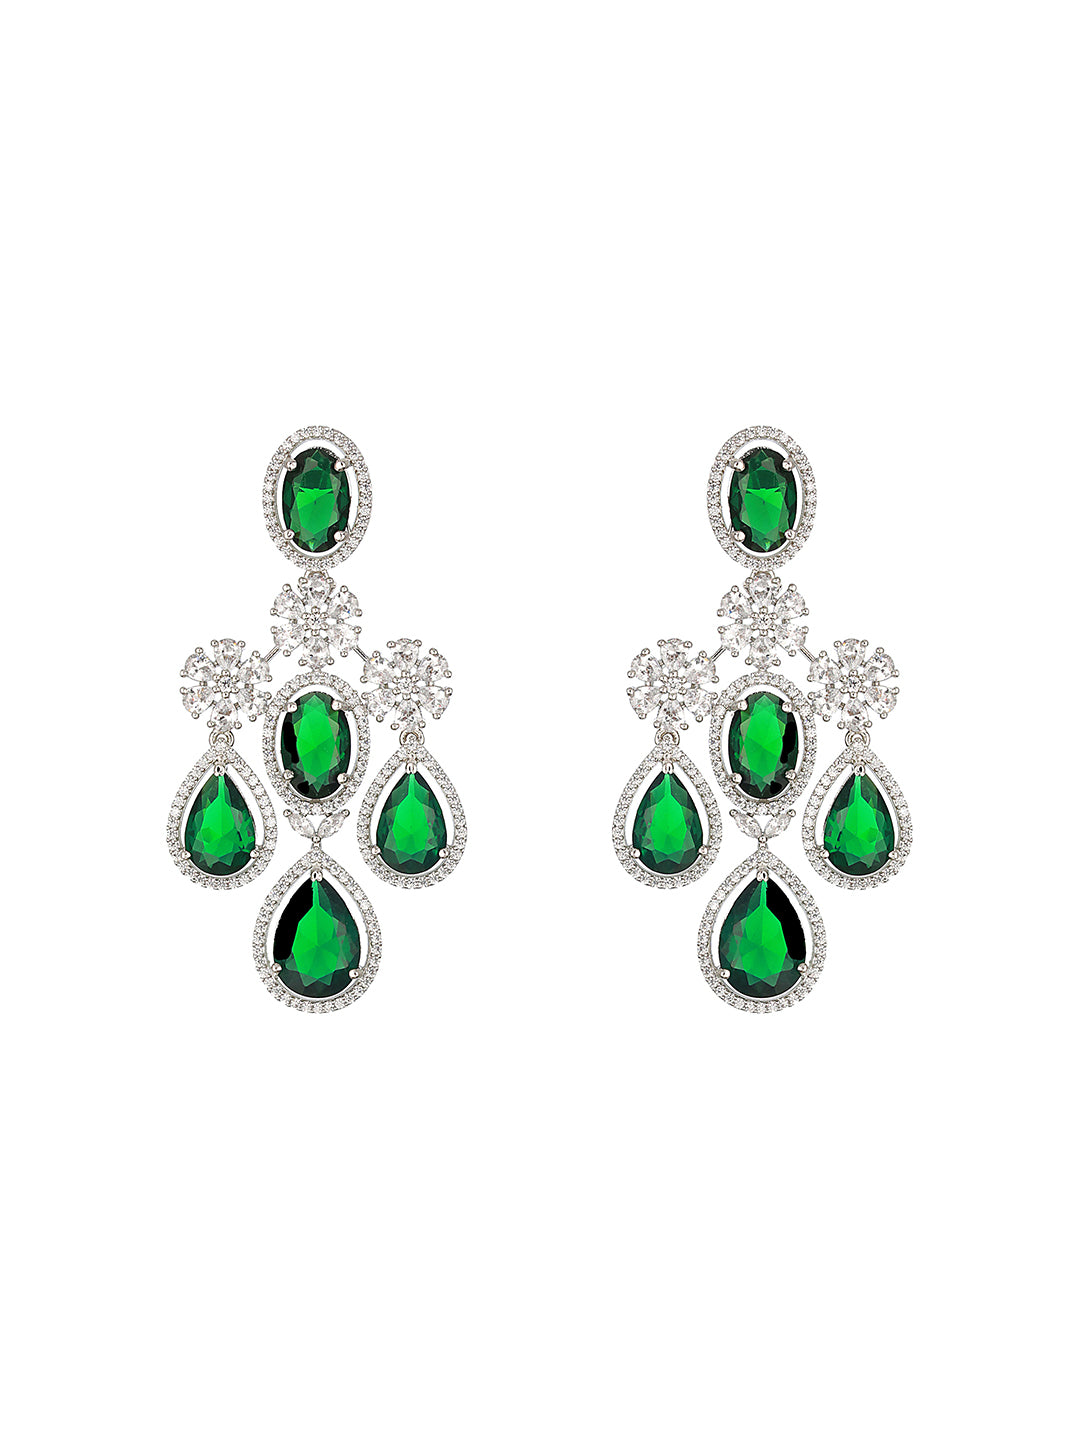 Emerald Floral Drops American Diamond Silver-Plated Jewellery Set